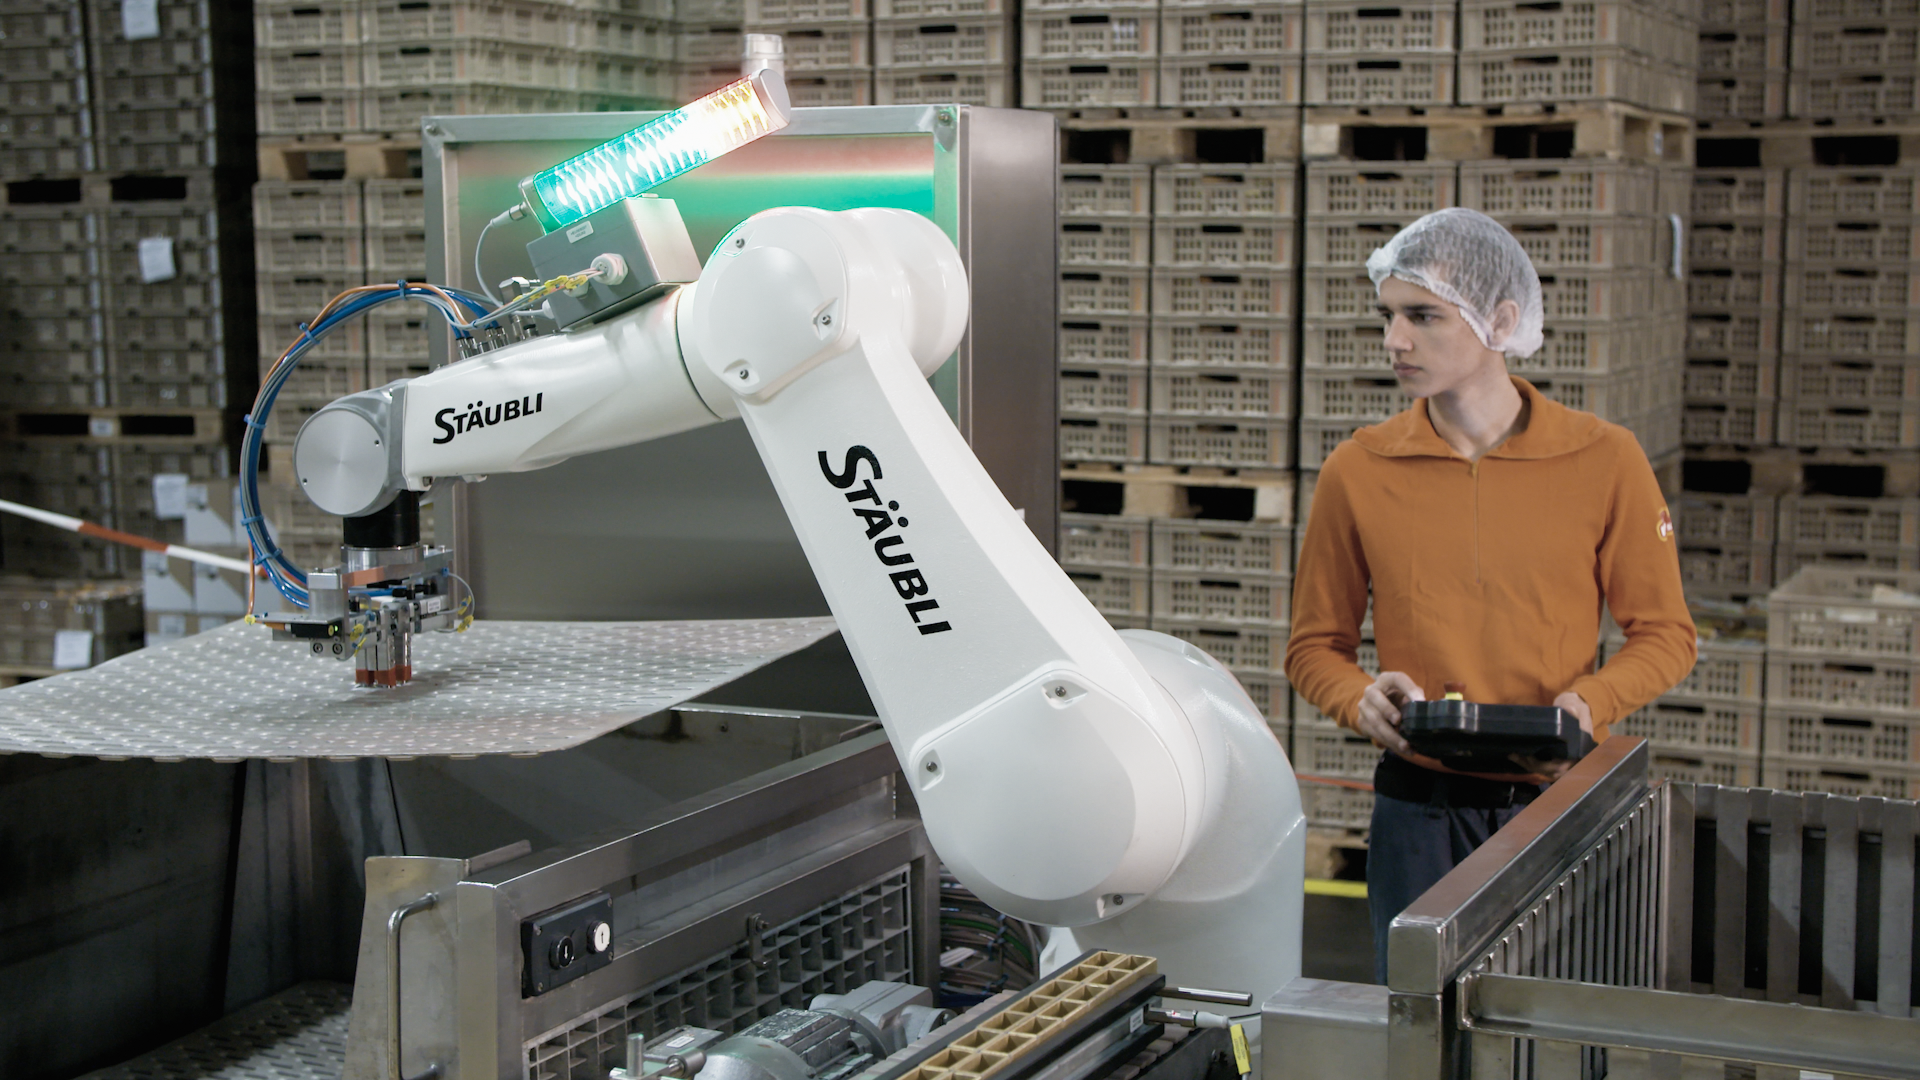 Safety, speed, and collaboration featured in new Staubli robots, controllers